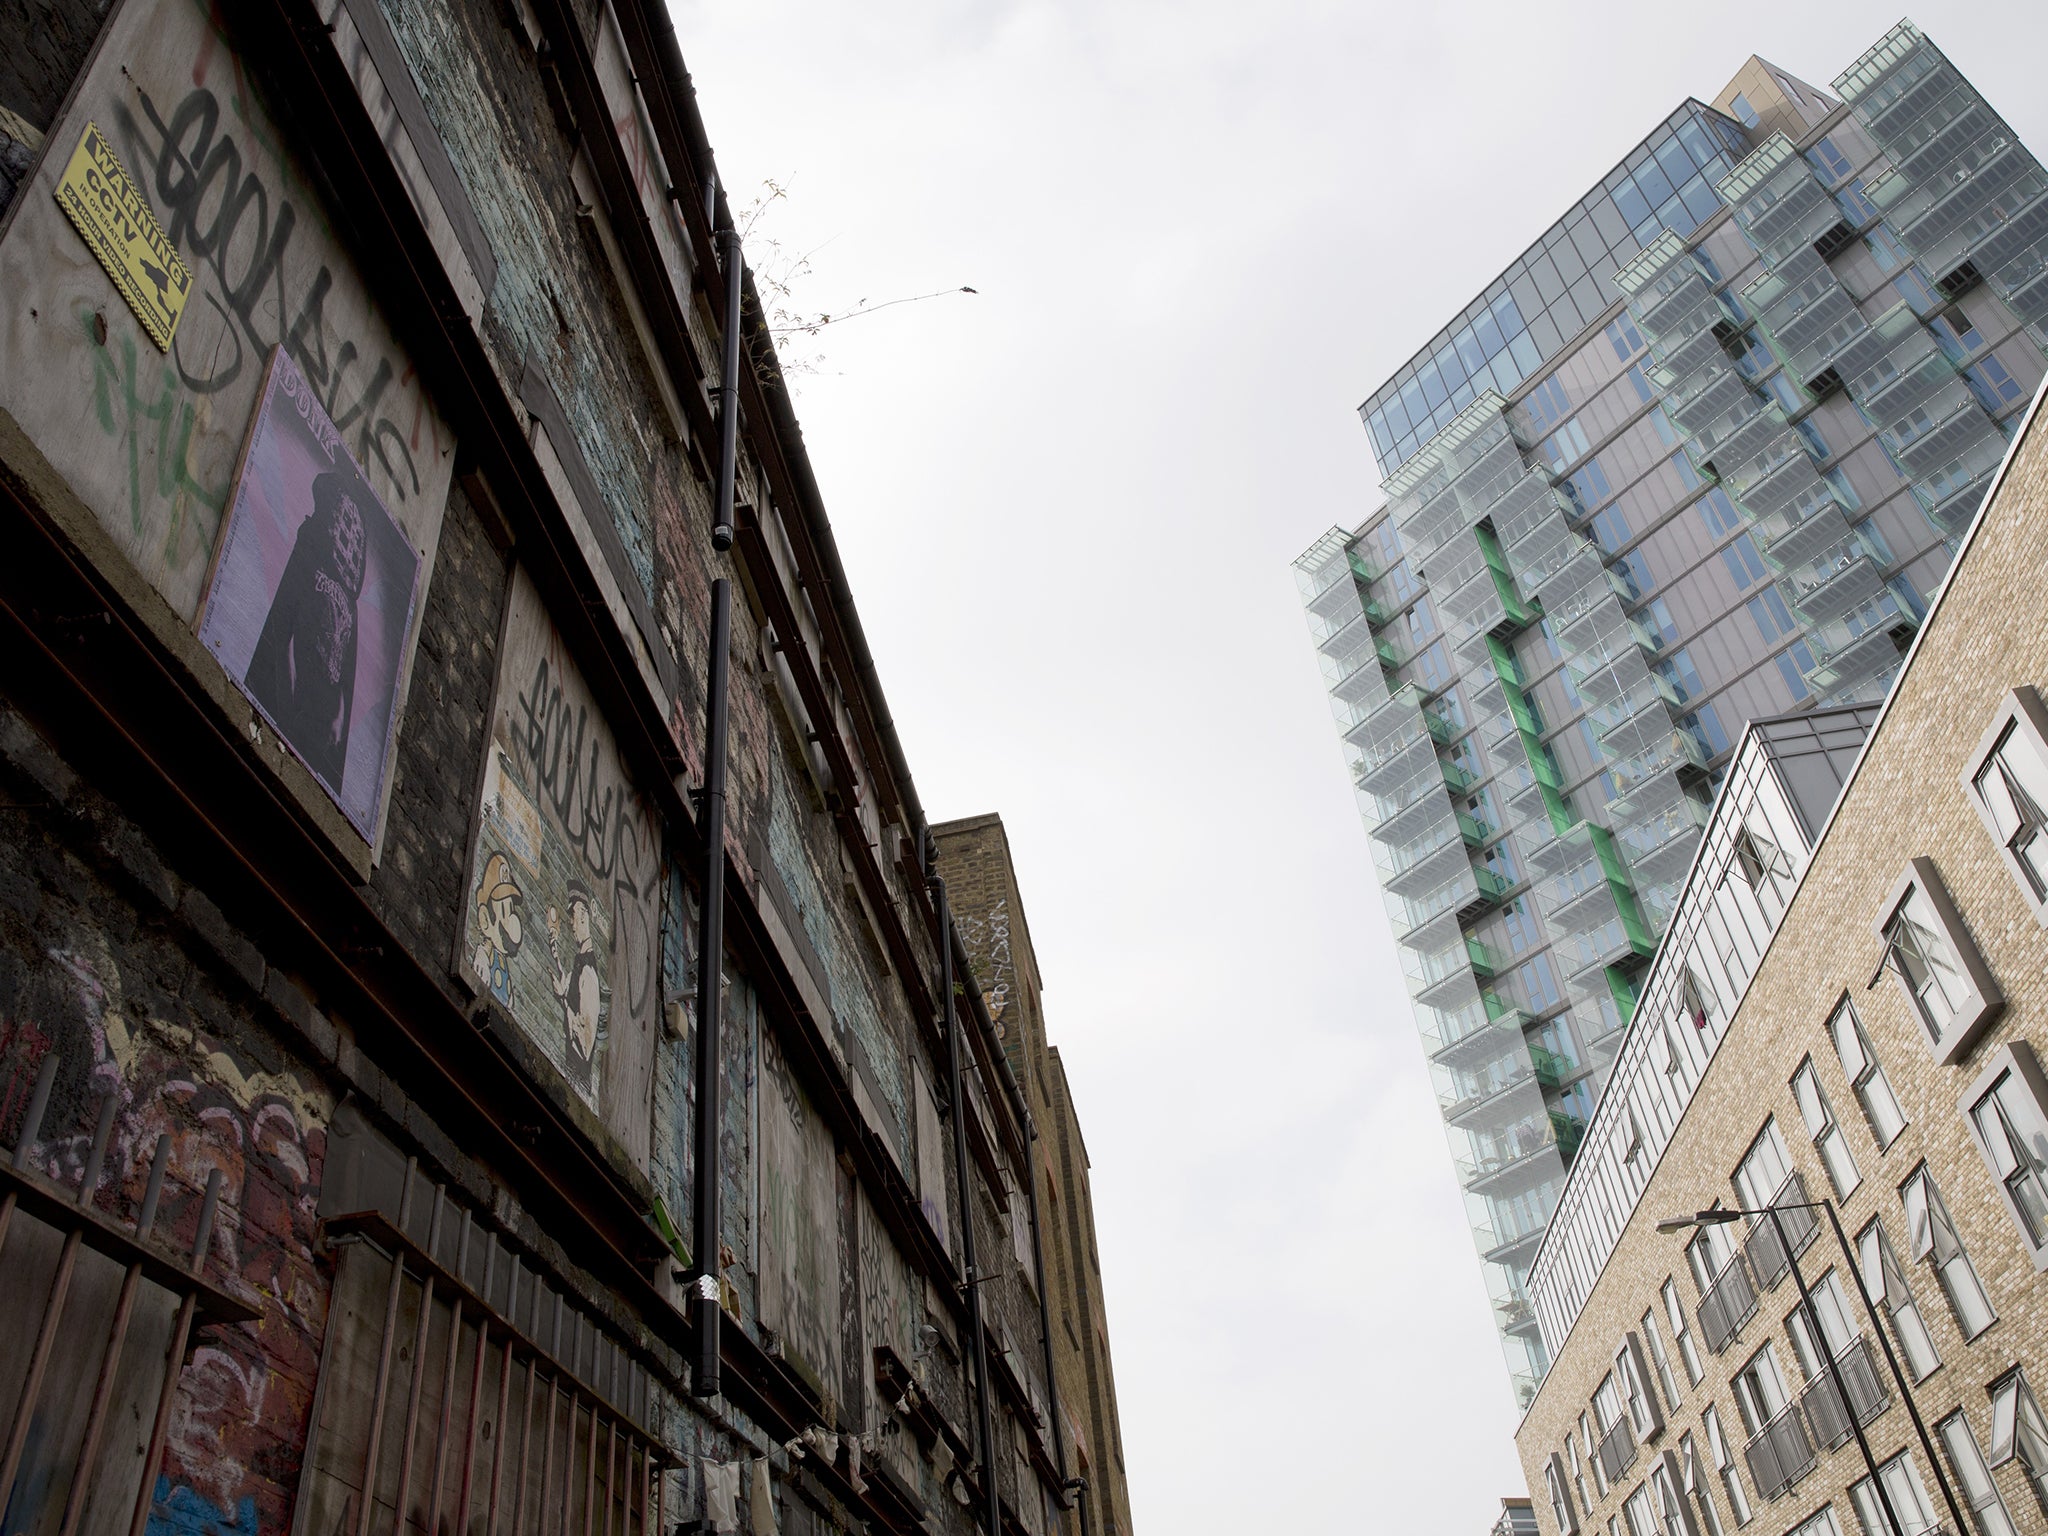 Commercial pressure: bohemian areas, such as Brick Lane, east London, become sought-after and overpriced